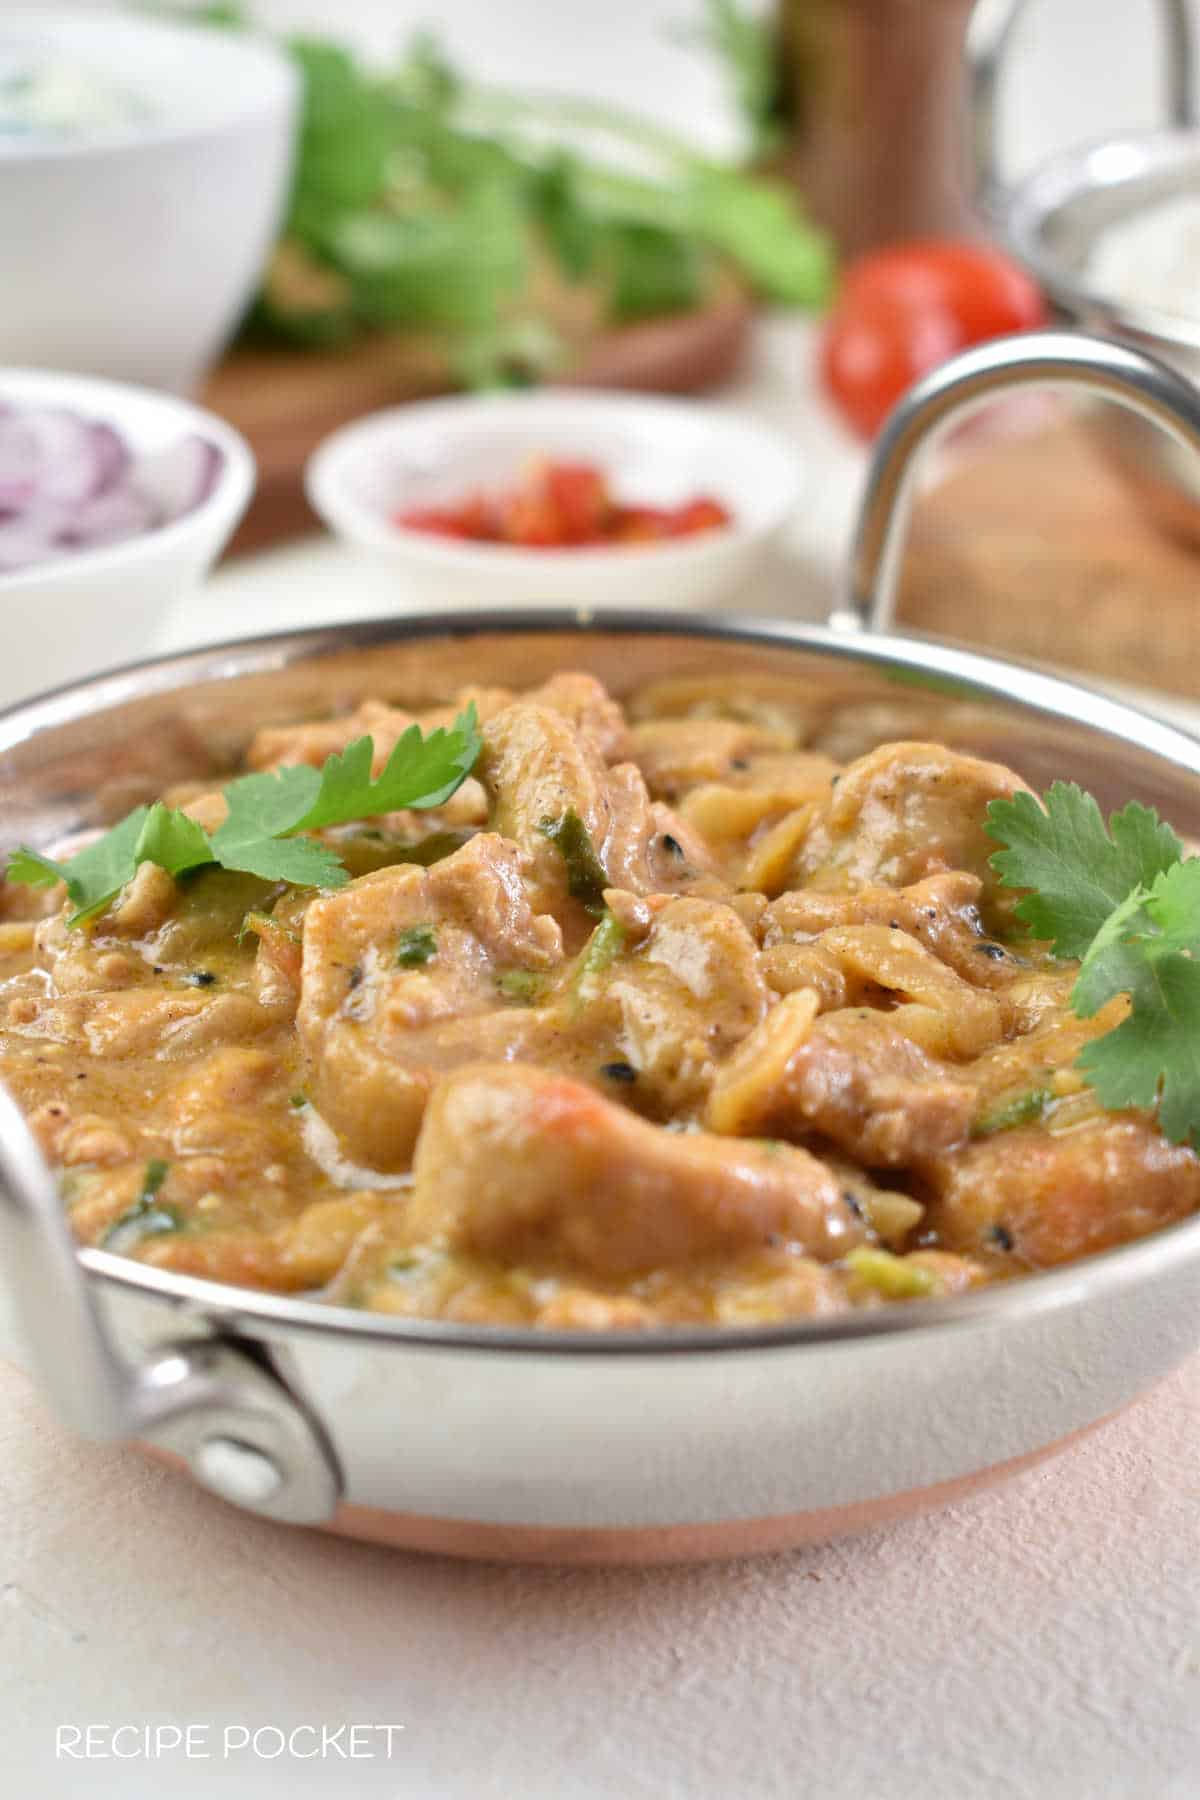 Balti chicken curry on a table with various dishes in the background.